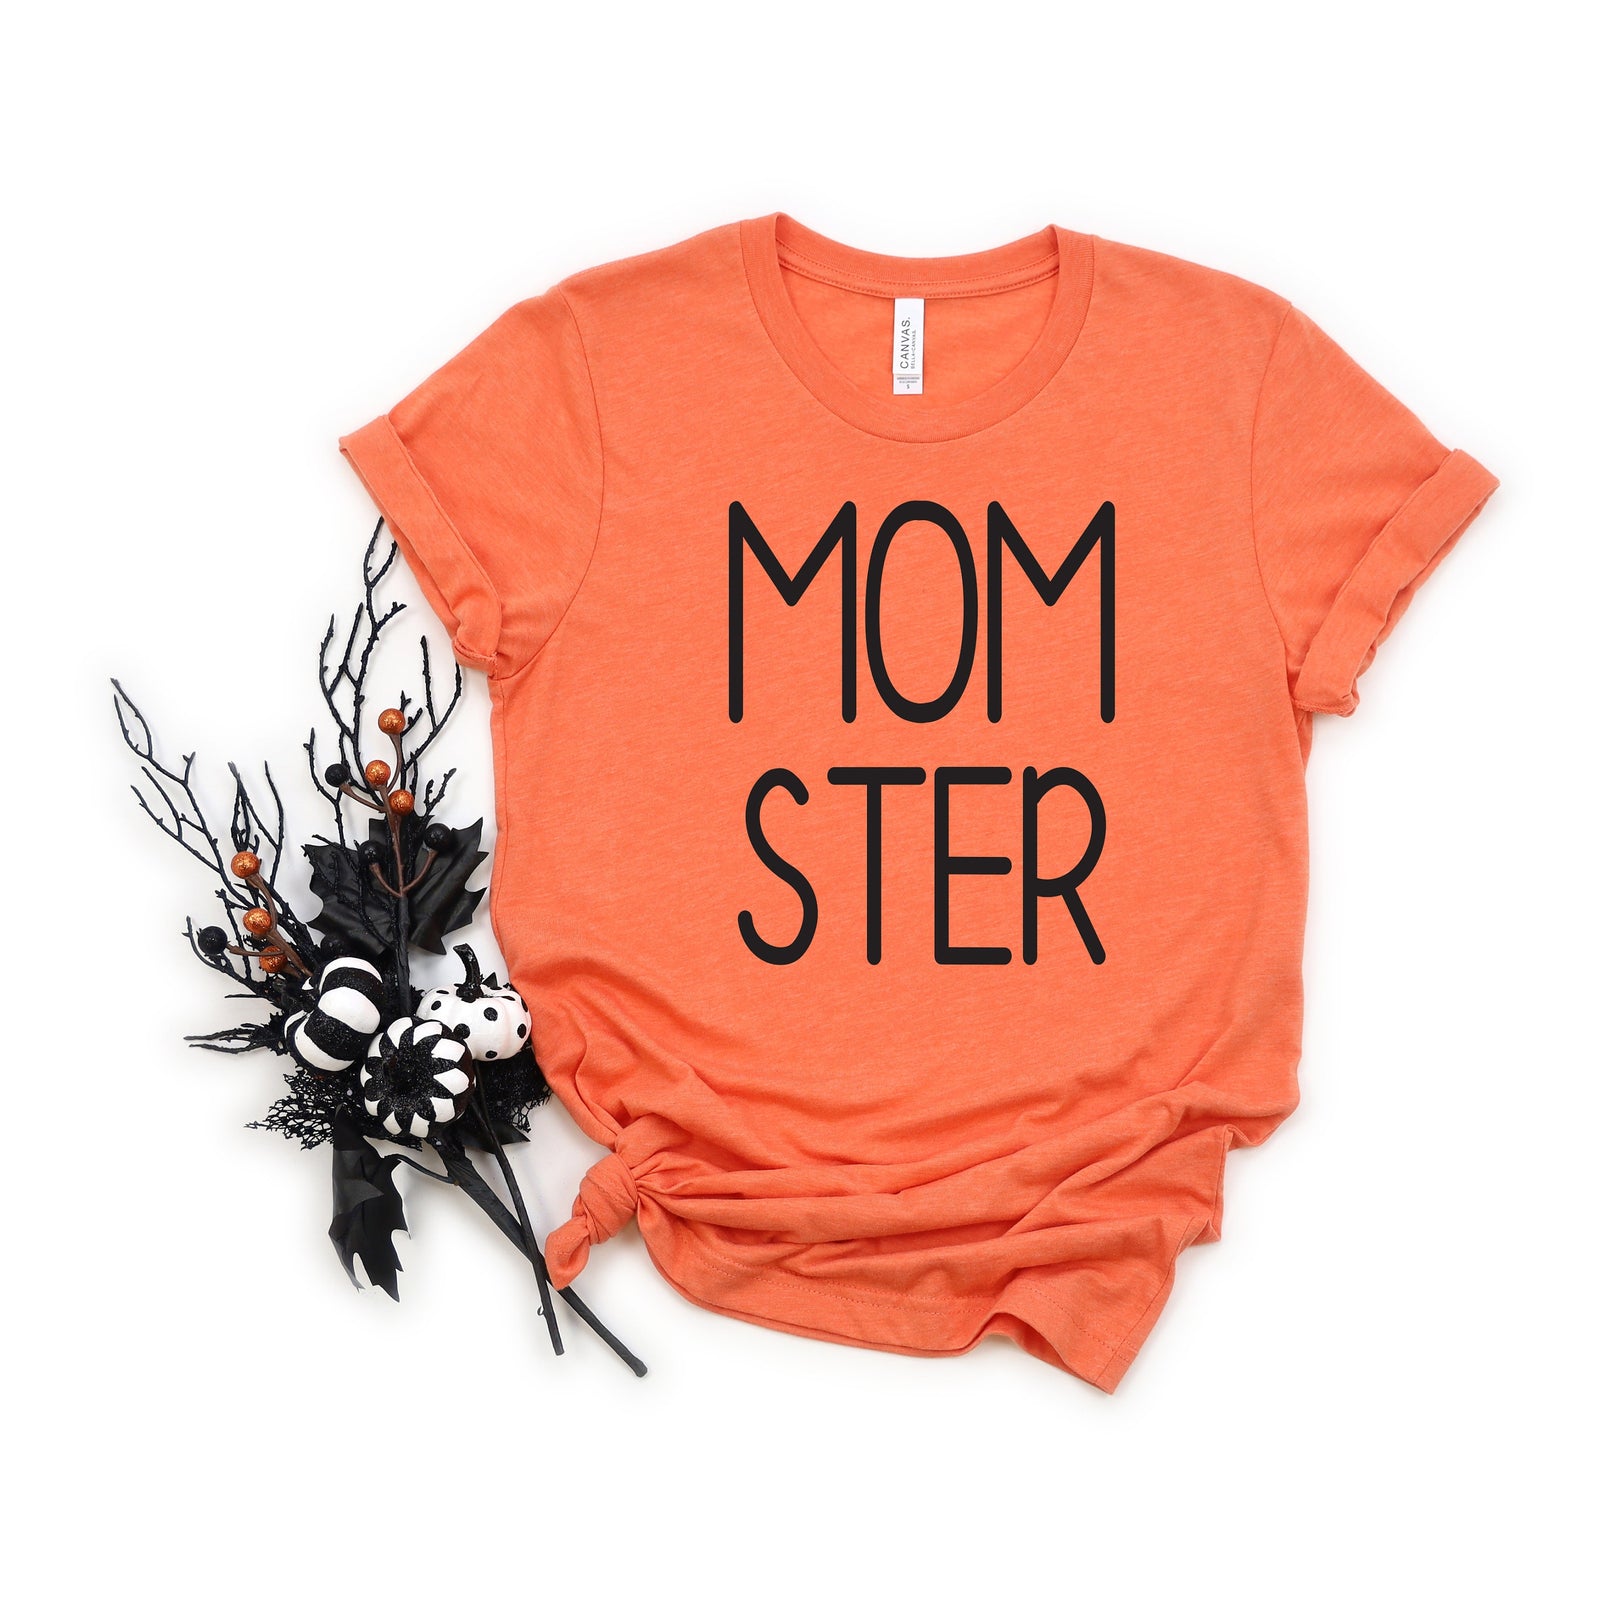 Momster - Happy Halloween Adult T Shirt - Mom T Shirt - Funny T Shirts